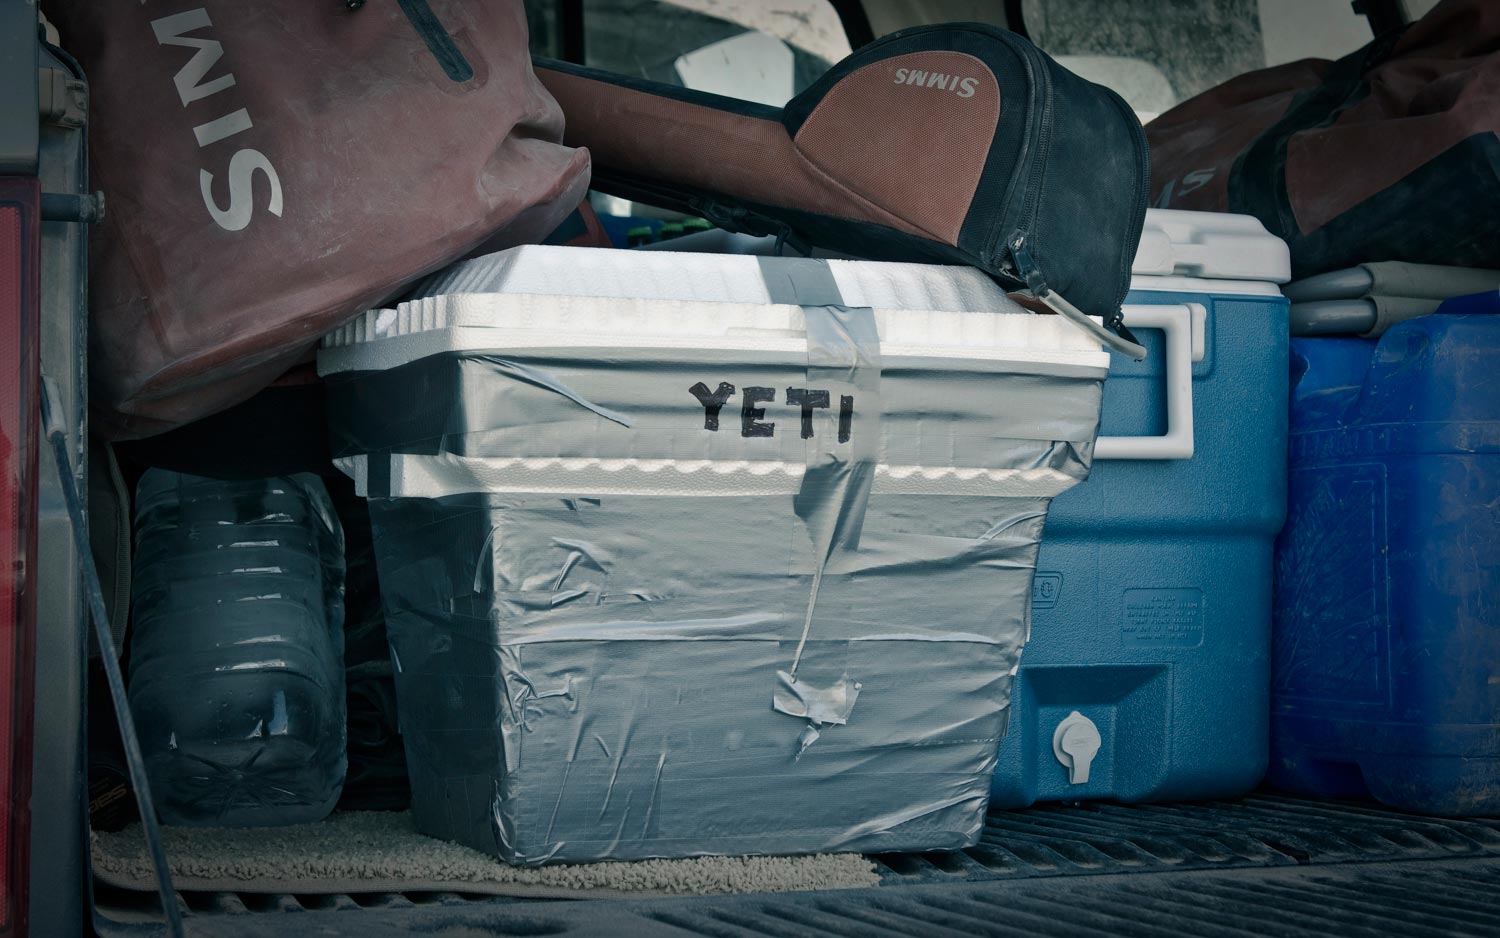 Got my first Yeti cooler today! : r/YetiCoolers